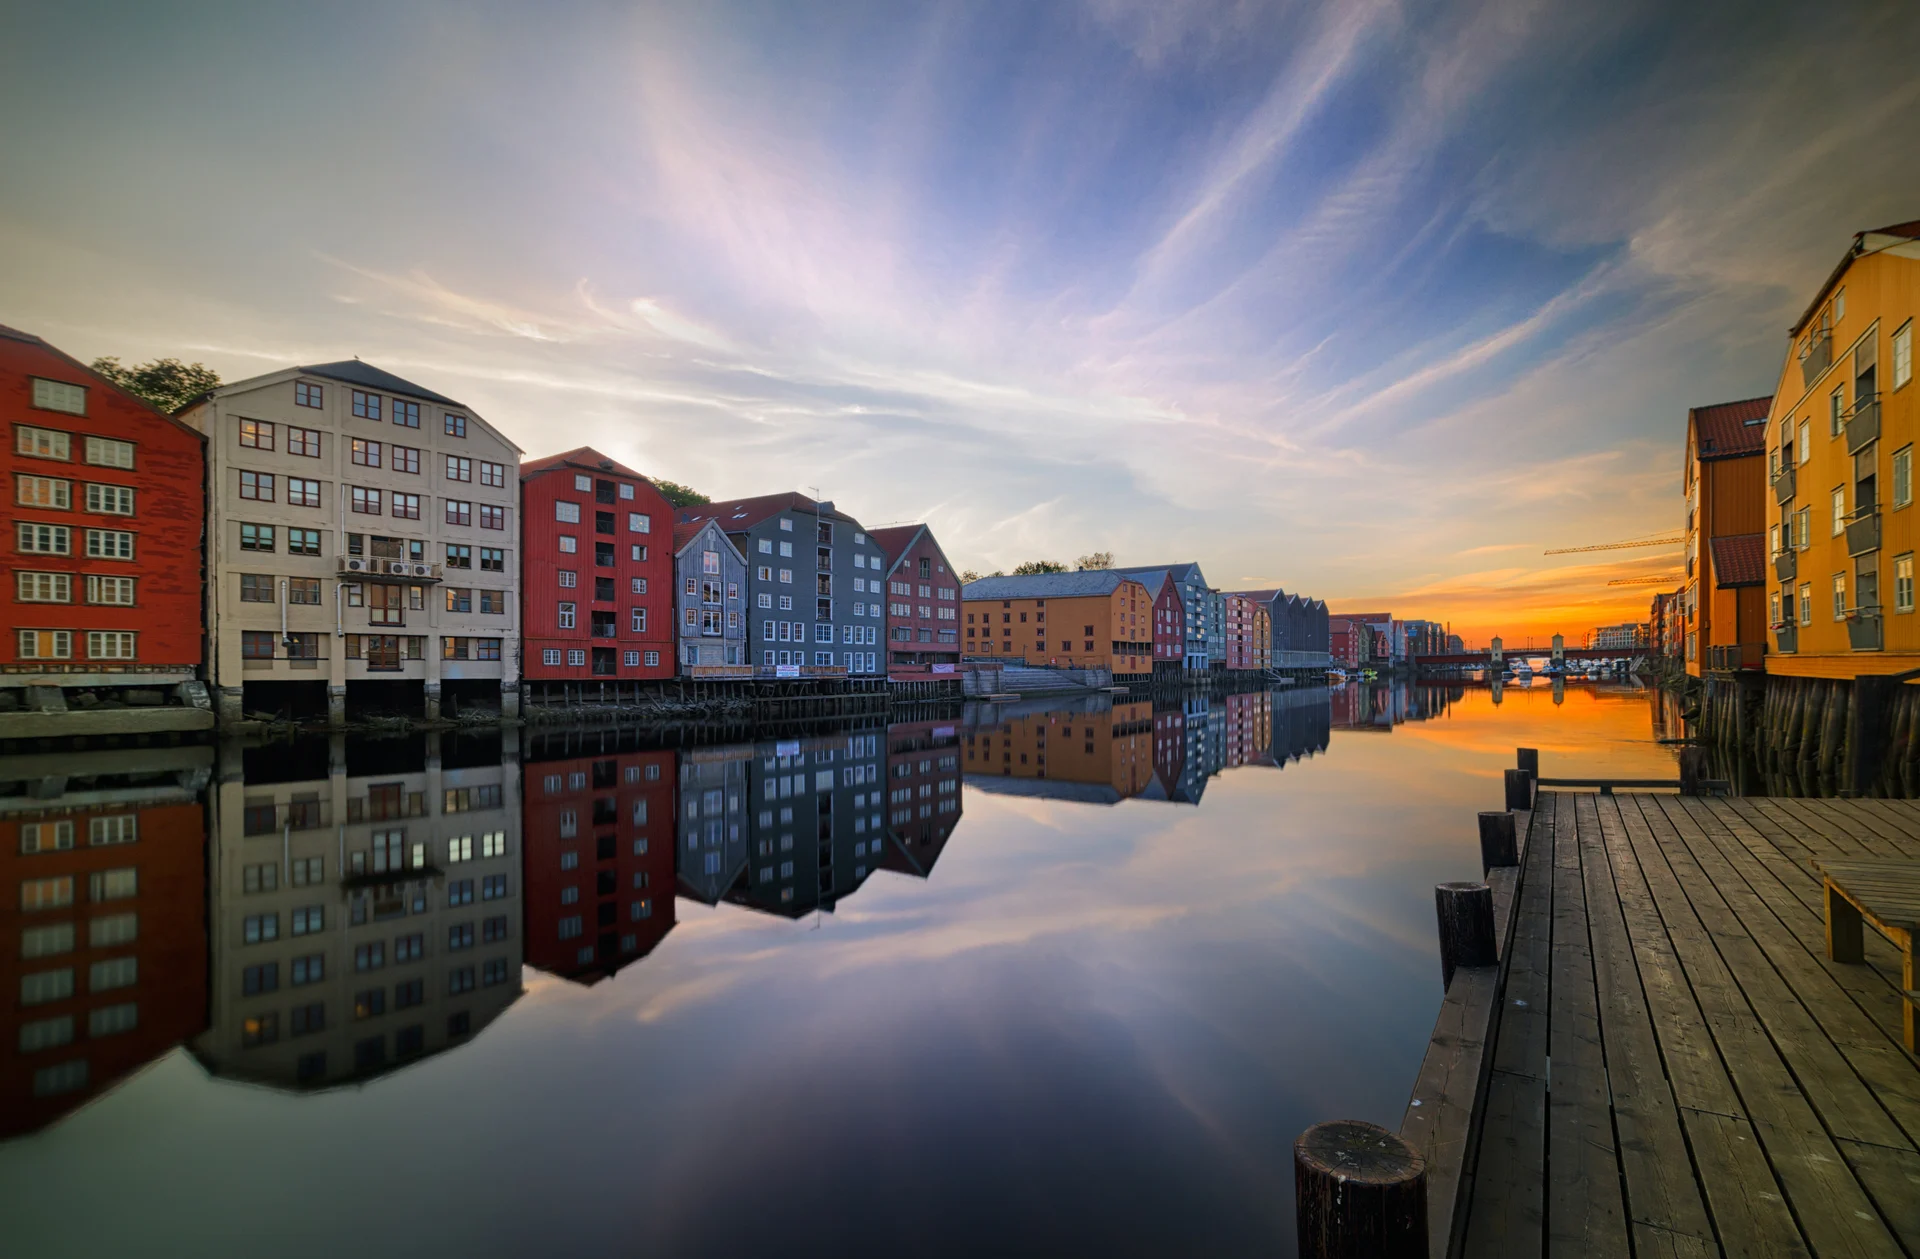 trondheim_norway_hgr_149591_1080_photo_getty_images